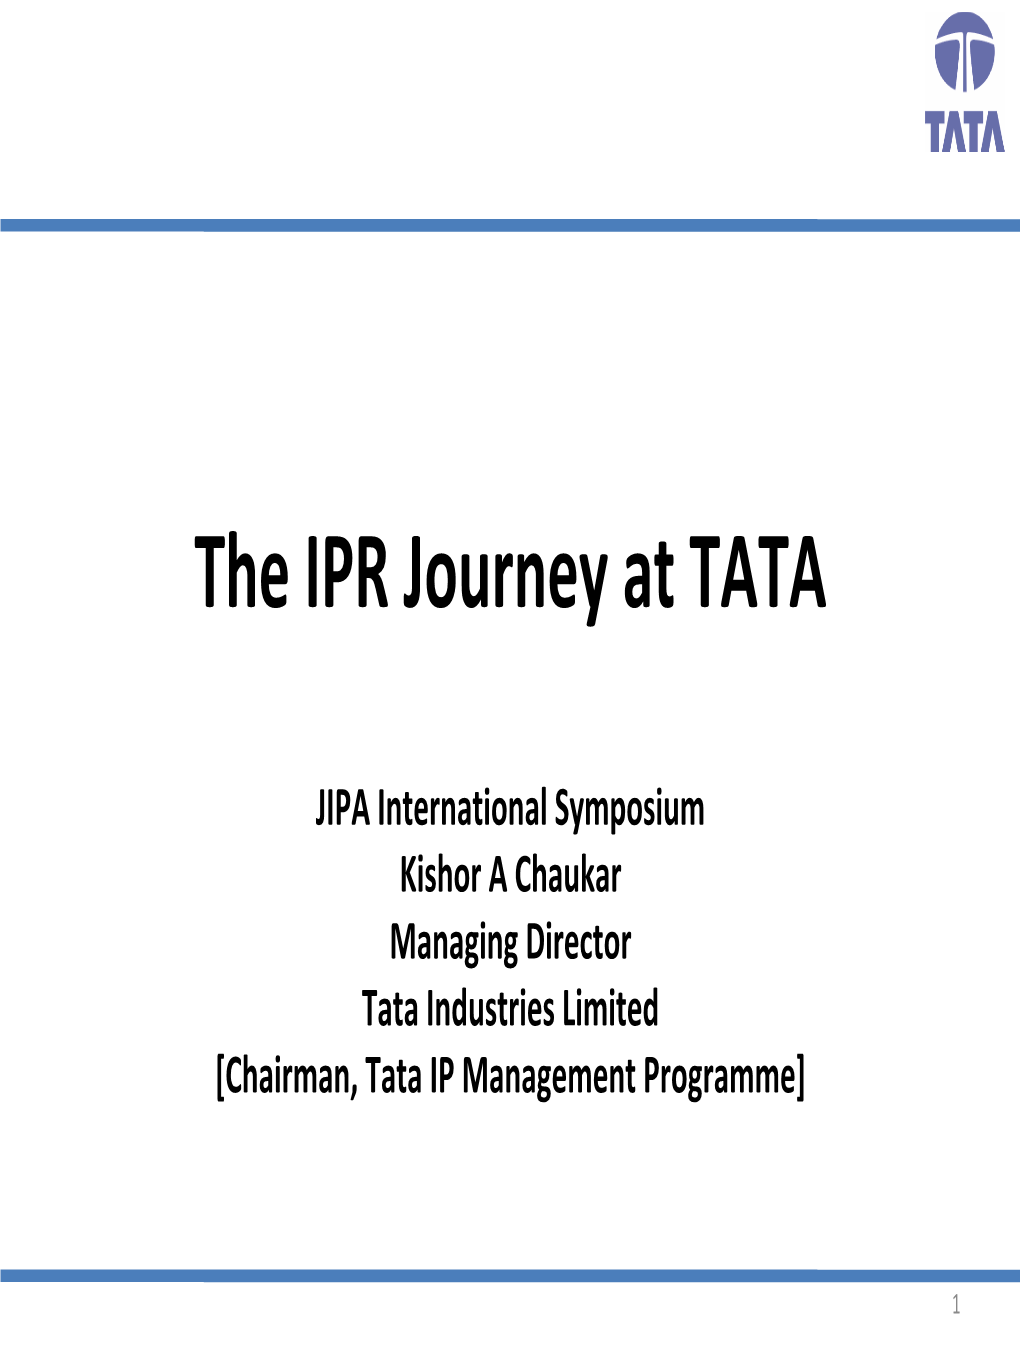 The IPR Journey at TATA